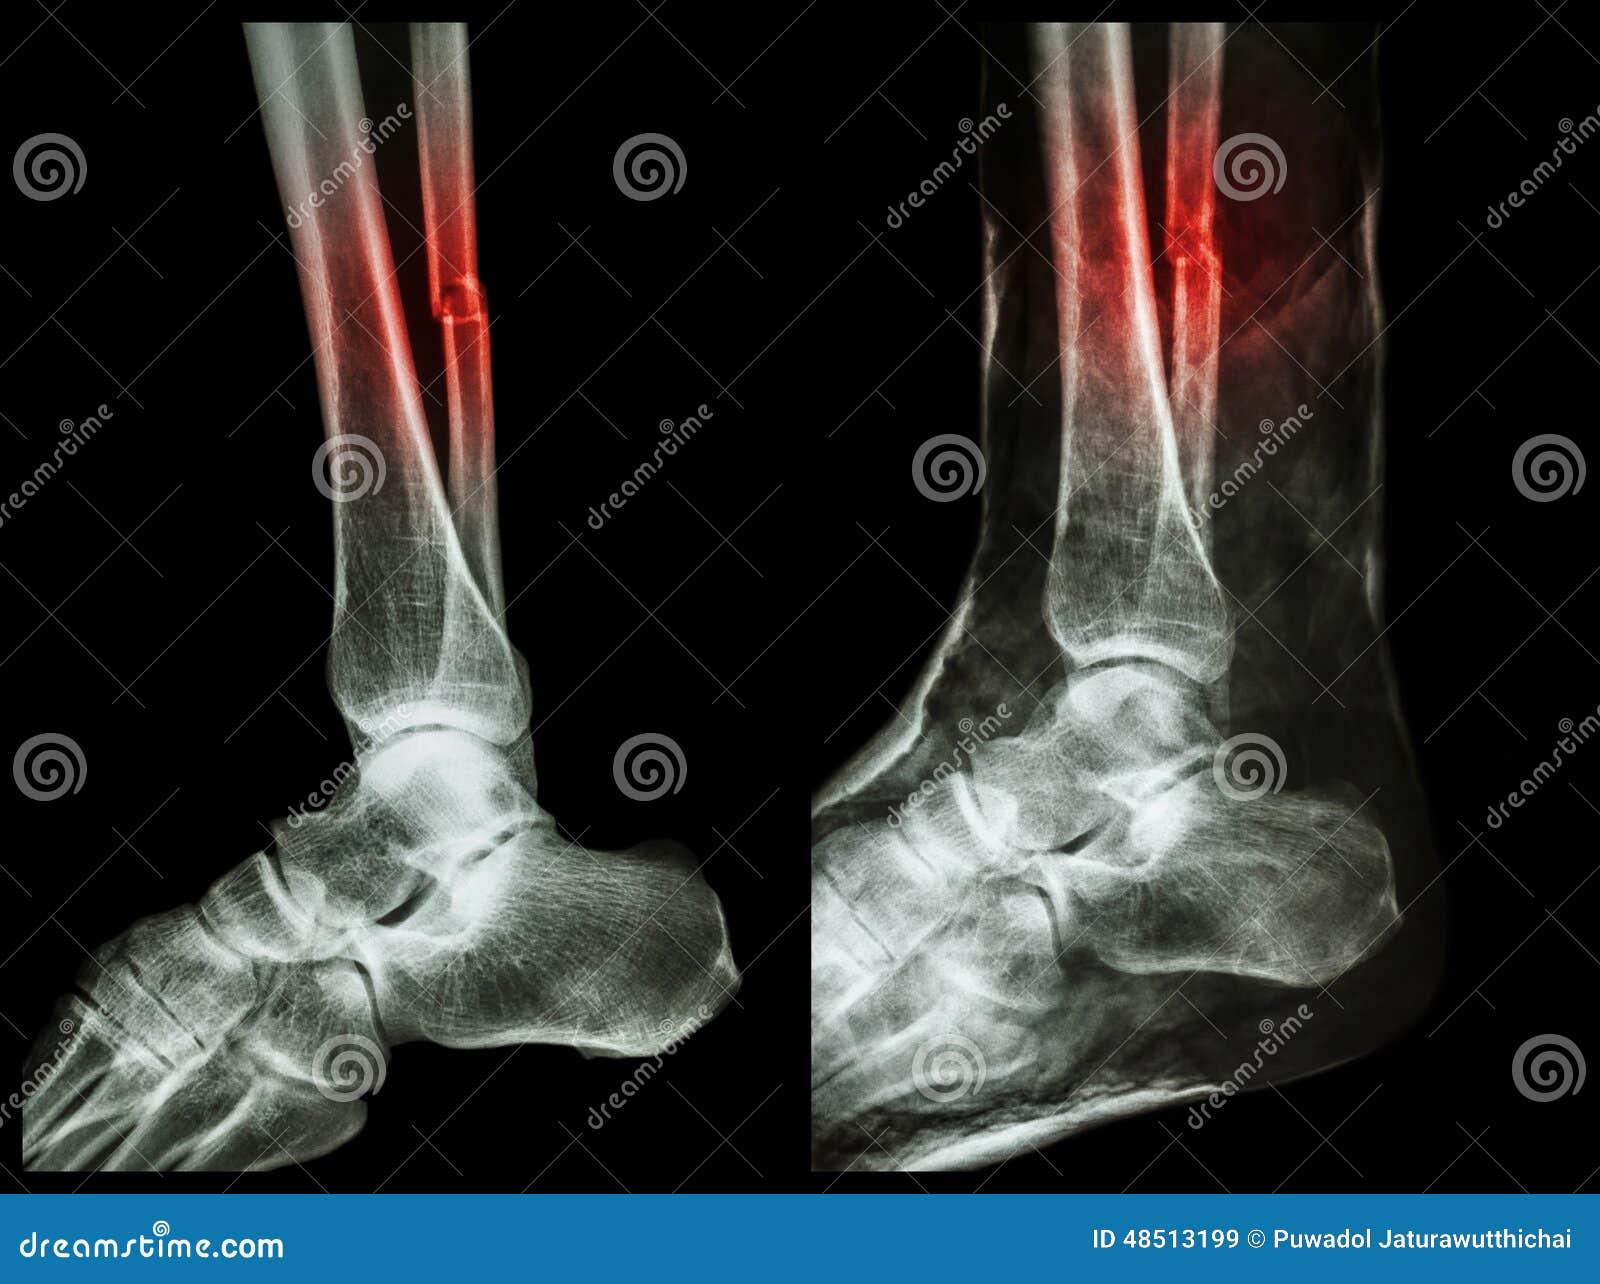 left image : fracture shaft of fibula (calf bone) , right image : it was splinted with plaster cast